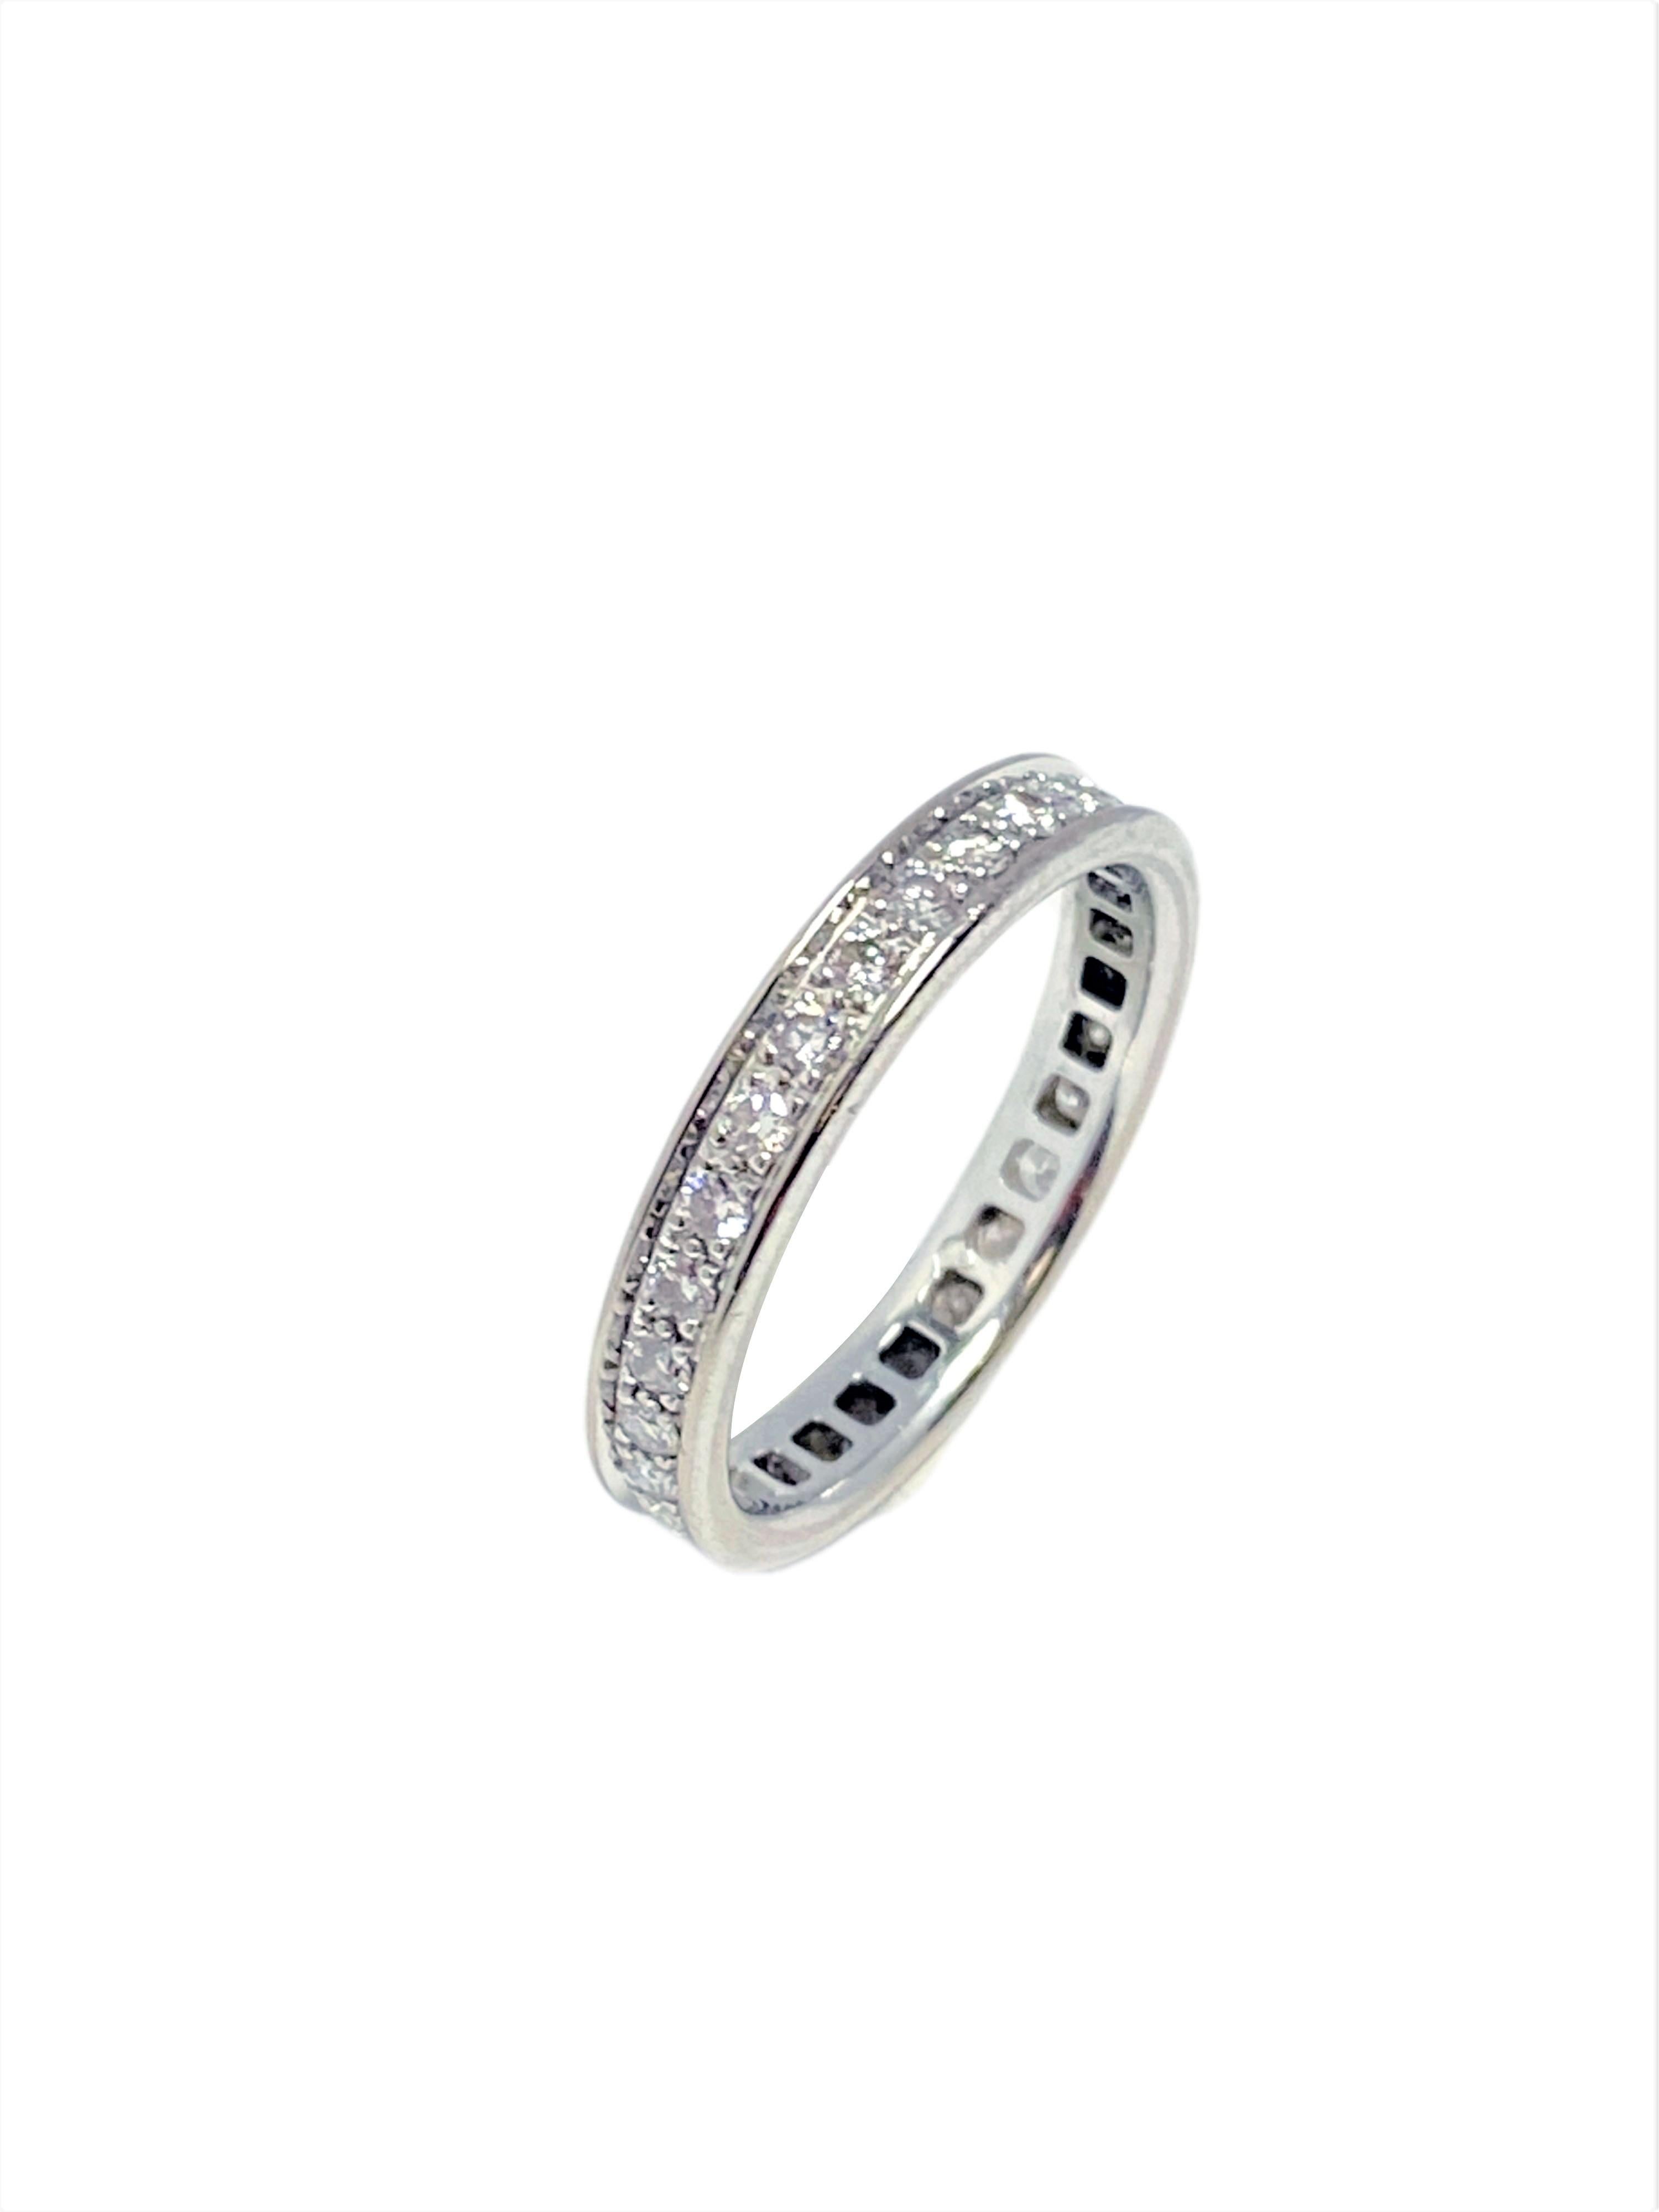 Circa 2007 Cartier Platinum Eternity Band Ring, 3 M.M. wide and a finger size 5 1/2, each Diamond in the channel is prong set, Fine white Round Brilliant cut Diamonds totaling 1 carat. signed, numbered and comes in the Original Cartier Presentation